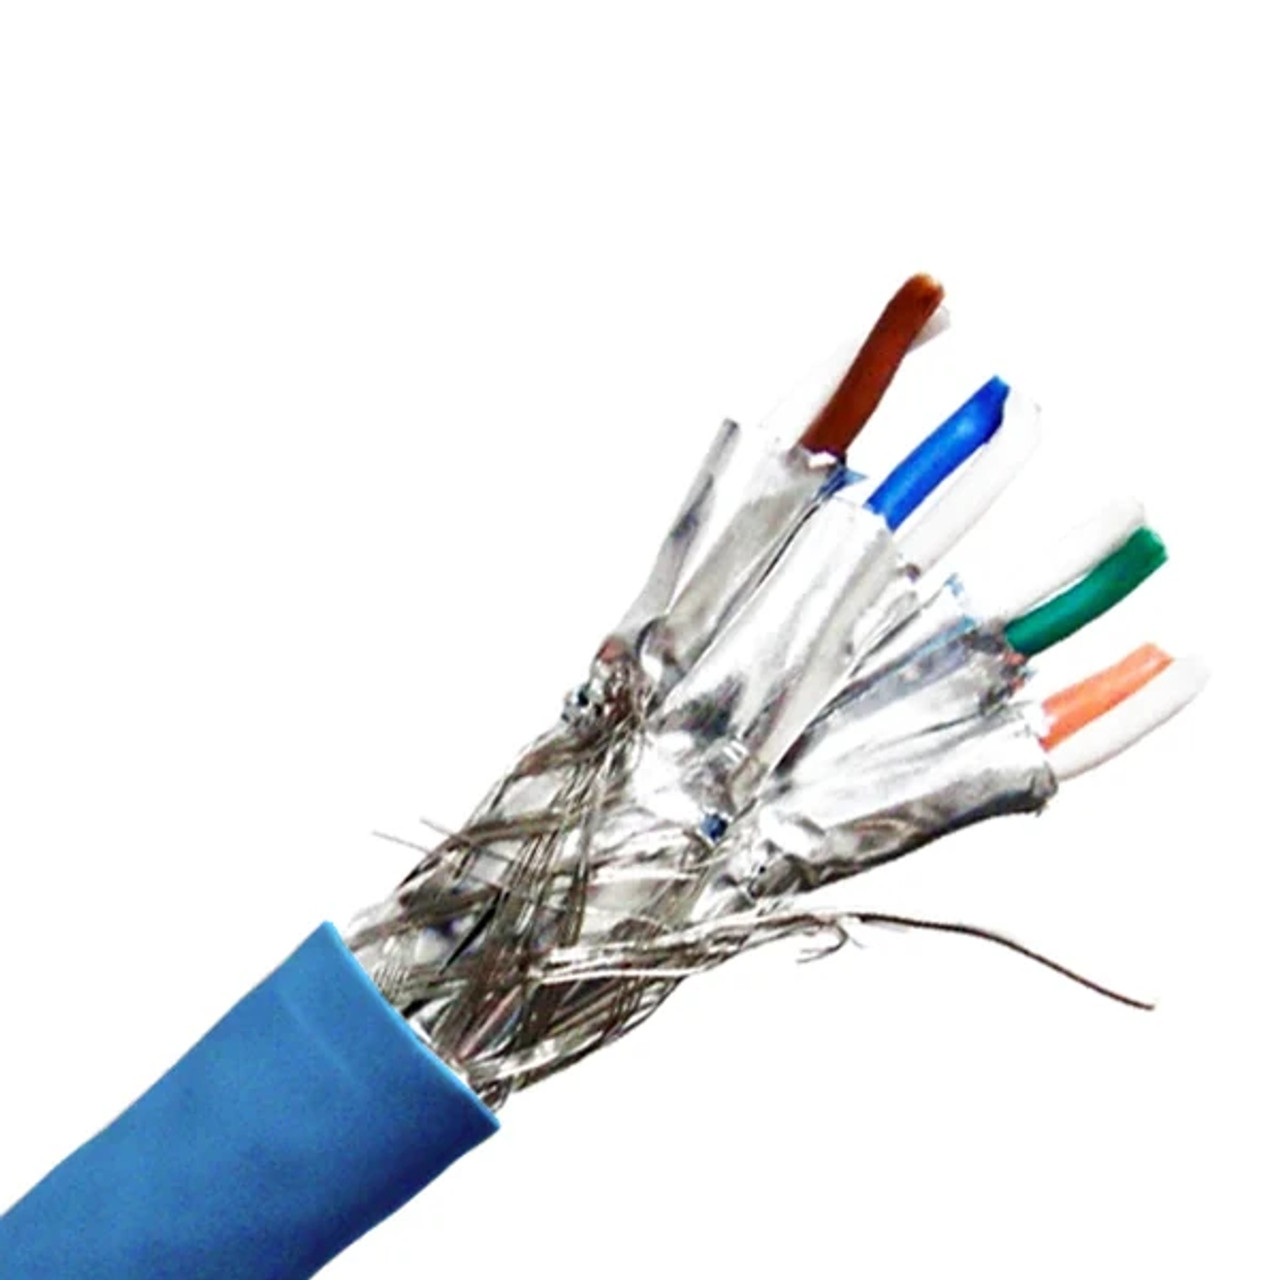 Cat7 Ethernet Cable: What You Need to Know